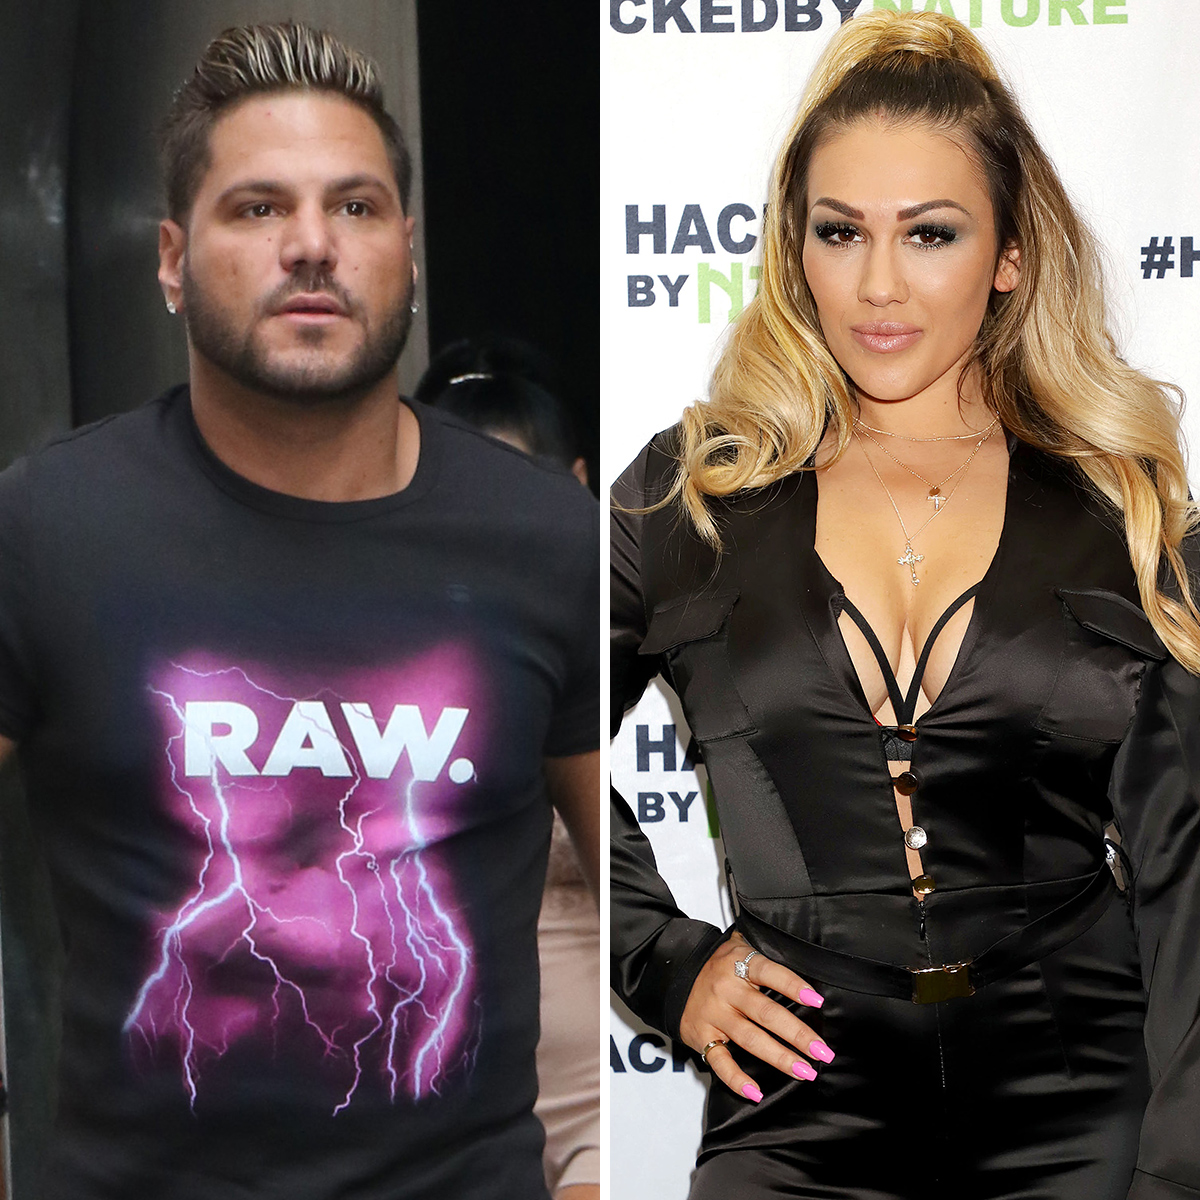 Ronnie Ortiz-Magro and Dean, his doppelganger, at a Las Vegas event